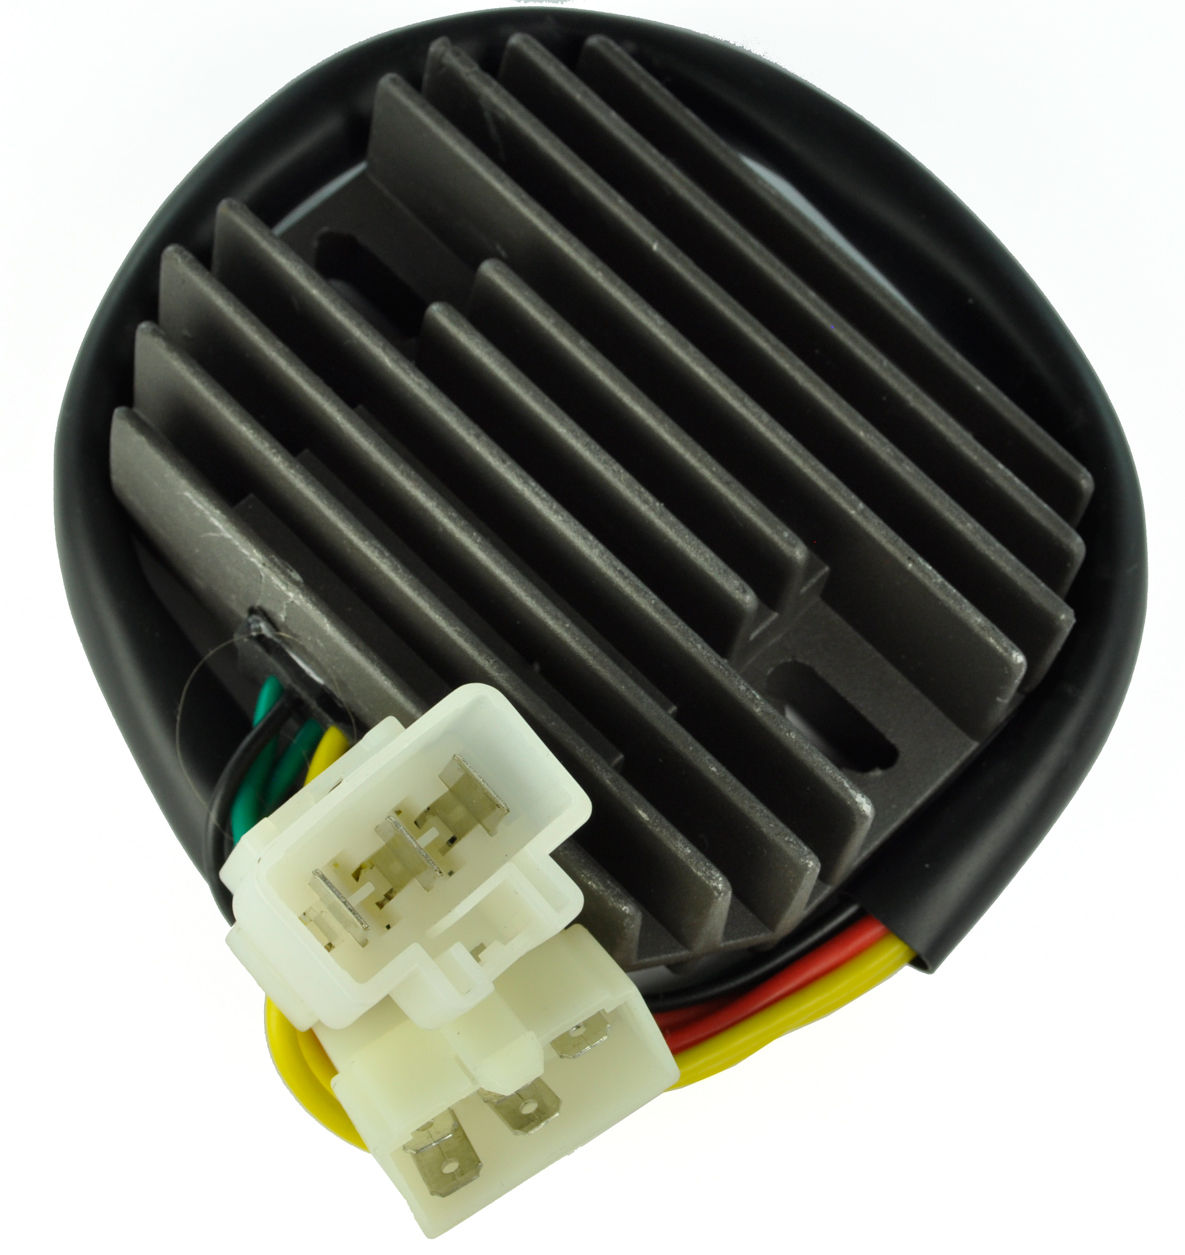 Rareelectrical NEW VOLTAGE REGULATOR COMPATIBLE WITH RECTIFIER HONDA VTX1800 2002 2003 2004 2005 2006 2007 2008 31600-MCJ-750 31600-MCH-000